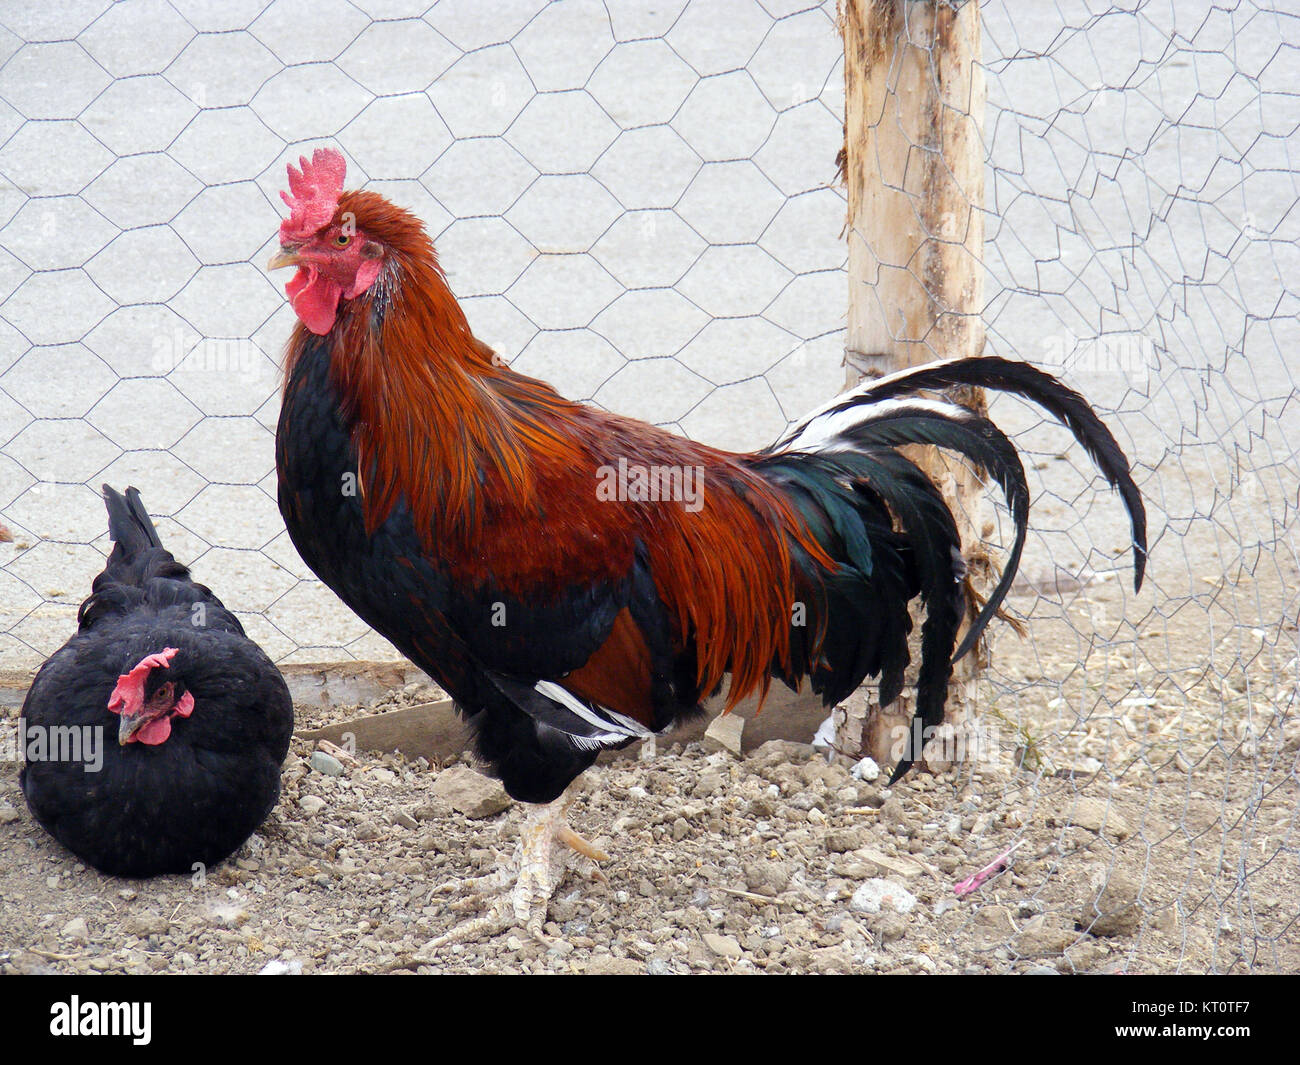 Rooster chicken and poultry Stock Photo